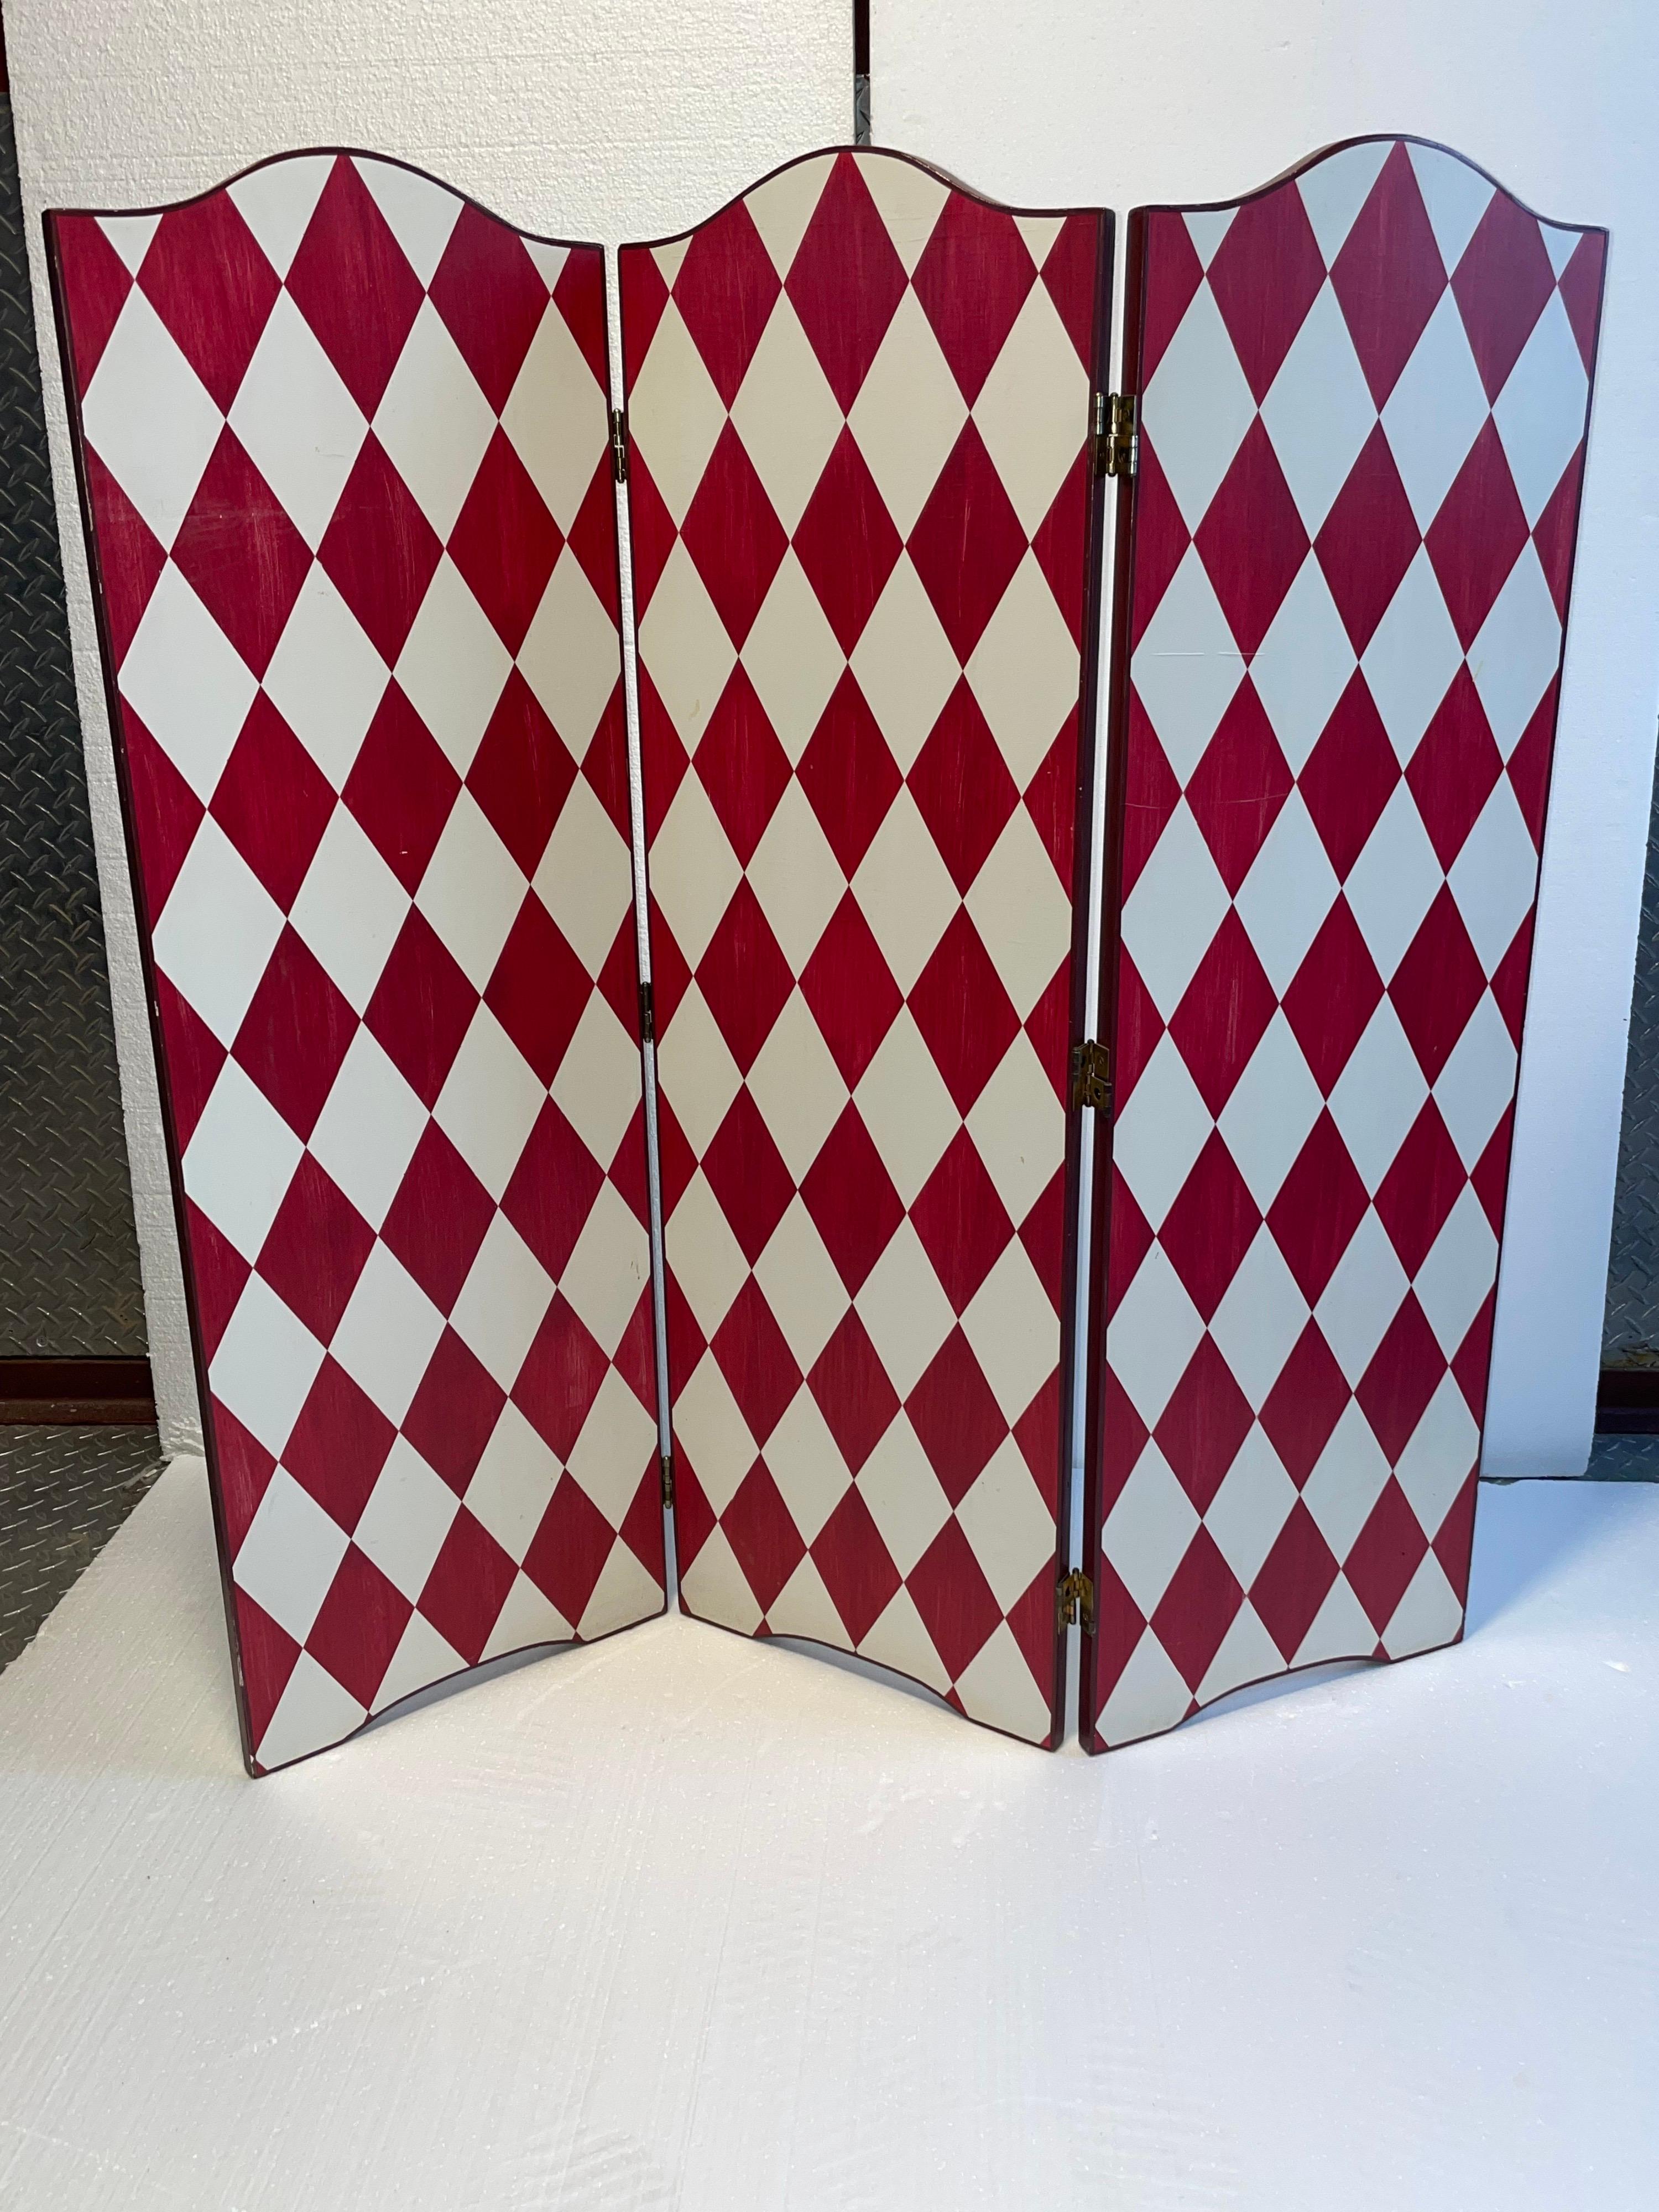 Artistic Hand Painted French Screen Divider in a Festive White and Deep Red For Sale 3